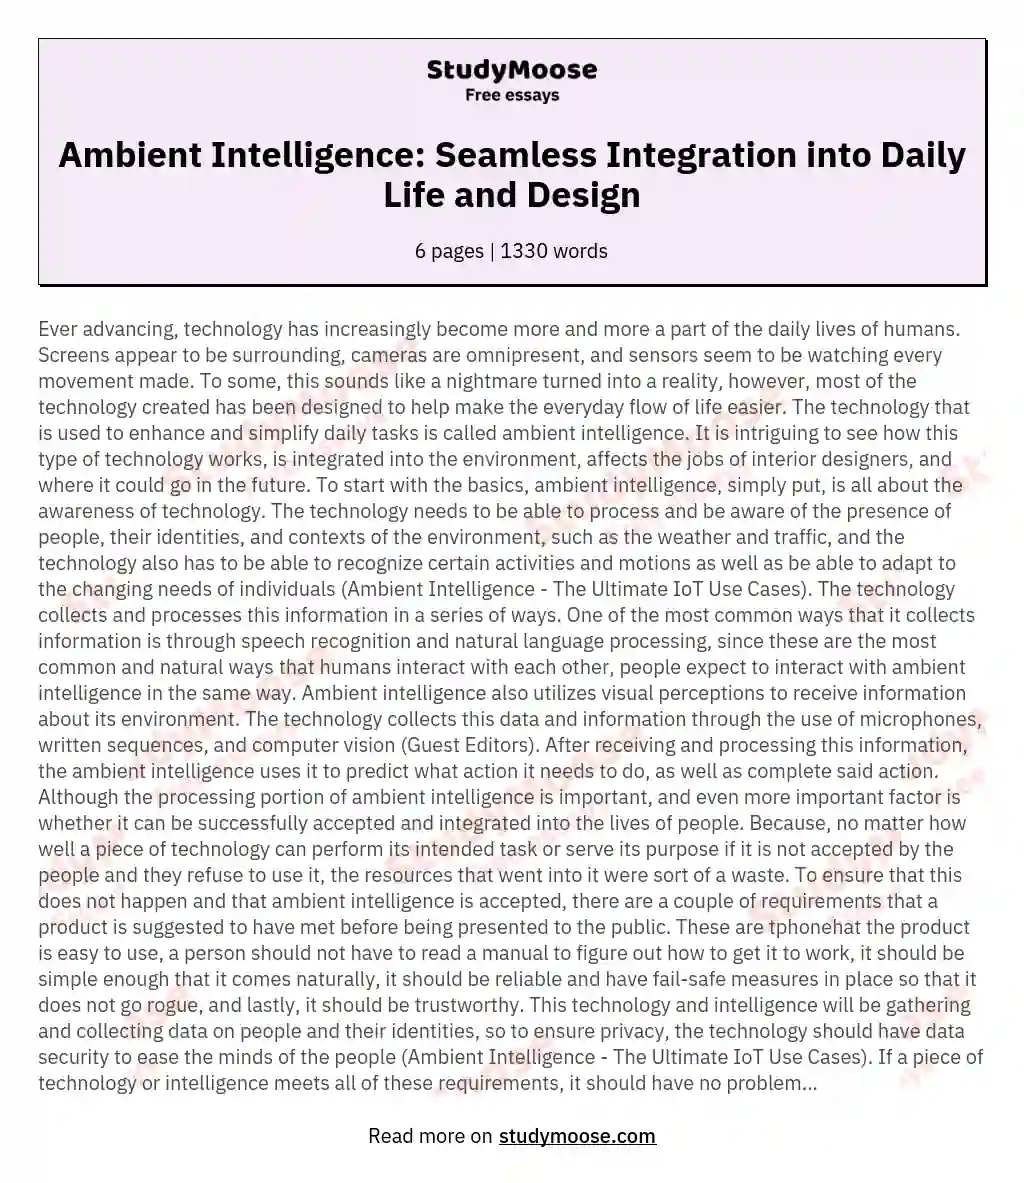 Ambient Intelligence: Seamless Integration into Daily Life and Design essay